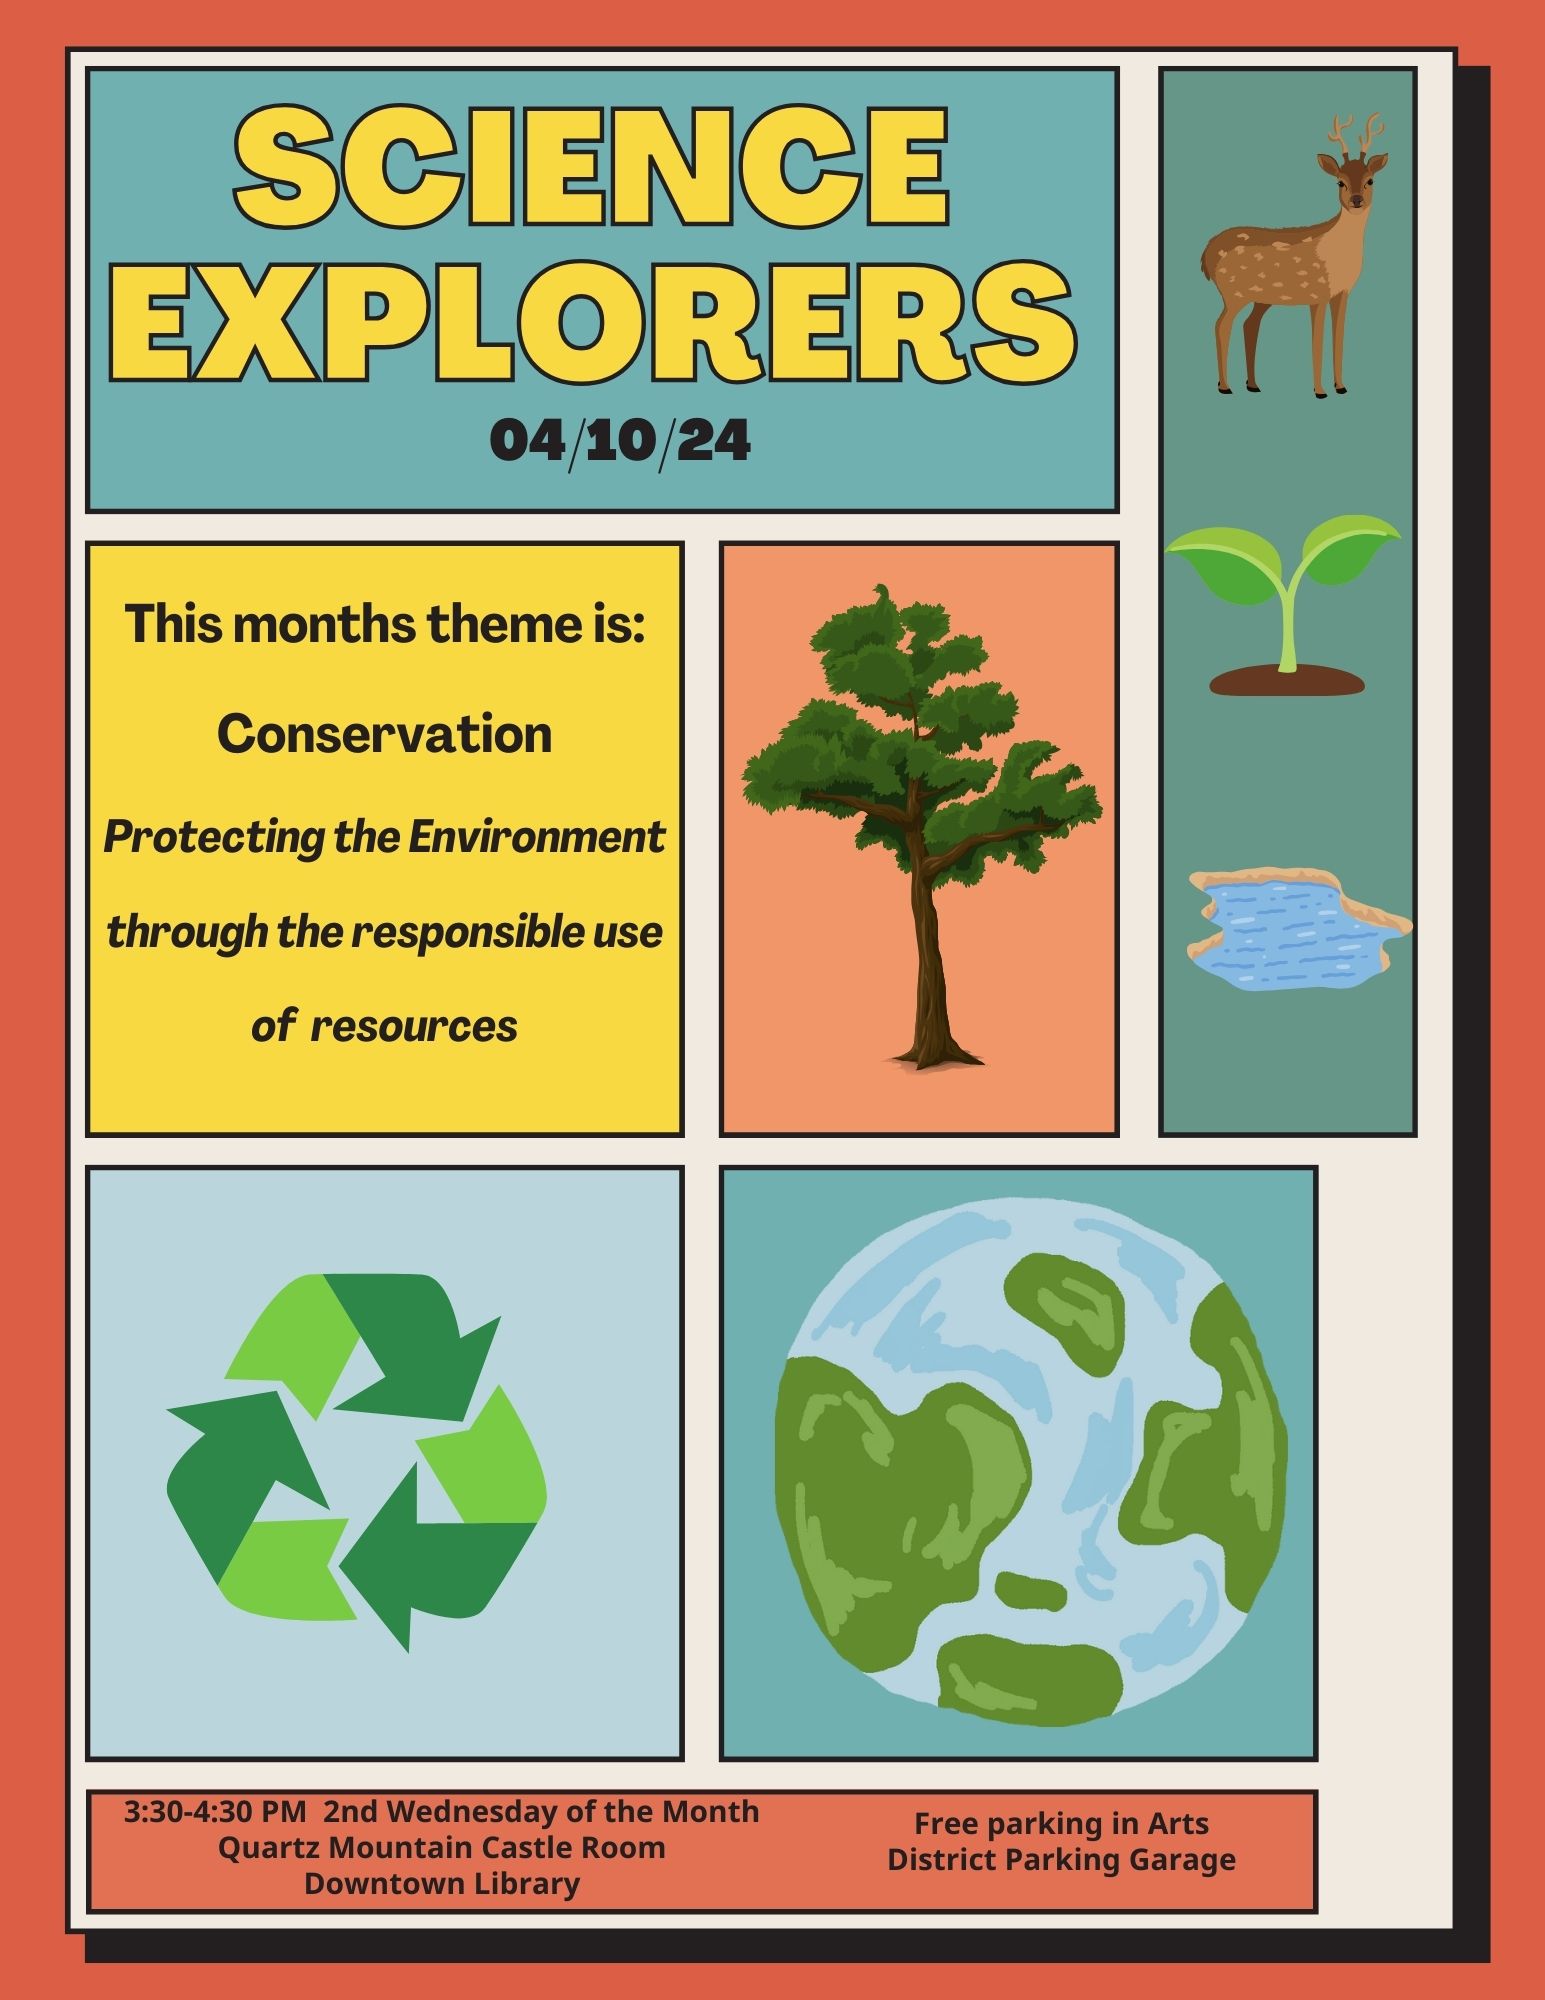 Vintage poster with images of a tree, recycling symbol, and a globe. Text reads: Science Explorers 04/10/24 This months theme is: Conservation Protecting the Environment through the responsible use of  resources